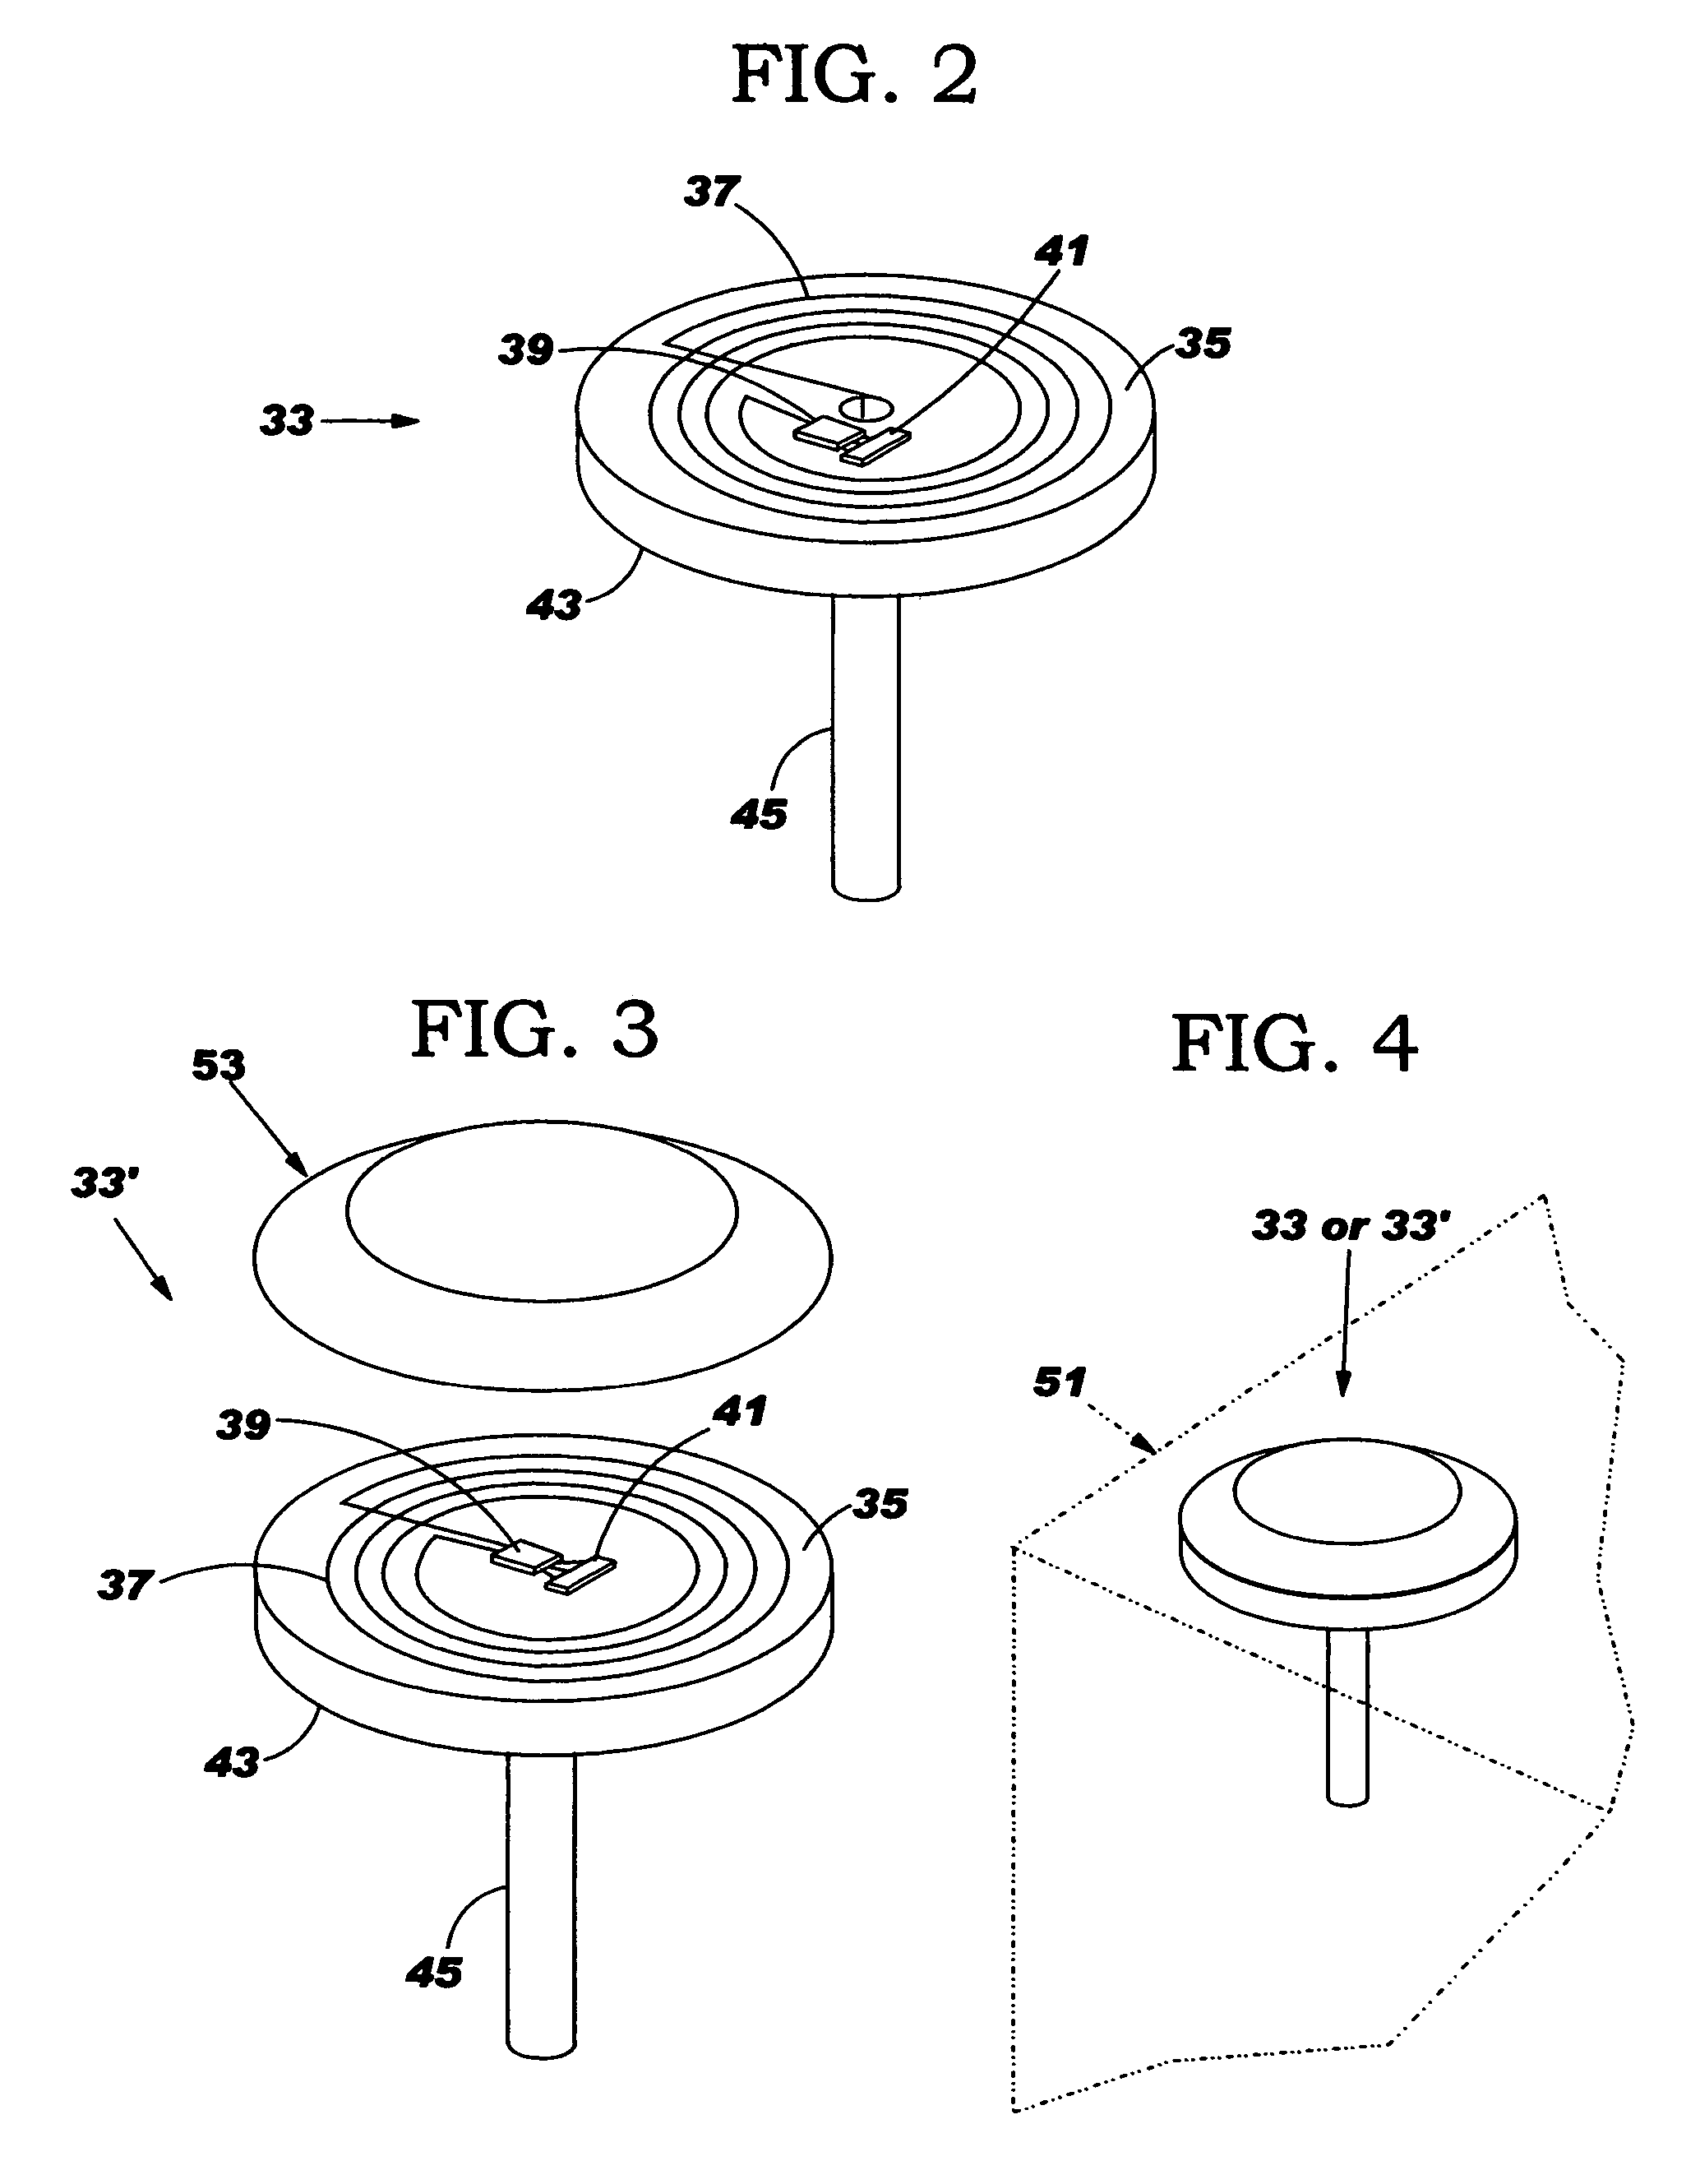 Radio frequency device for tracking goods